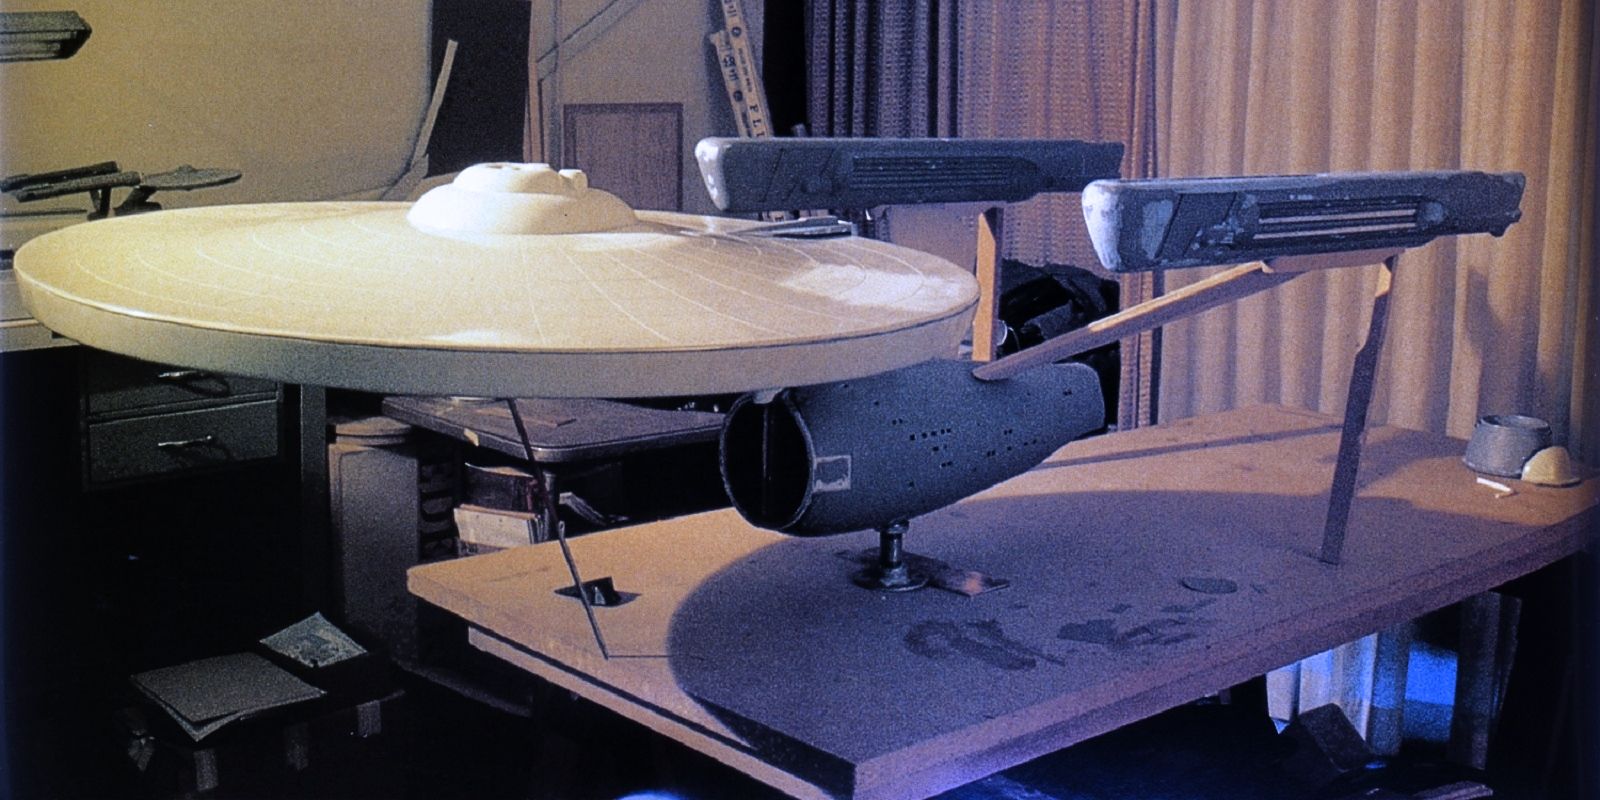 The unfished Star Trek Phase II filming model of the USS Enterprise, sitting on a table via Paramount